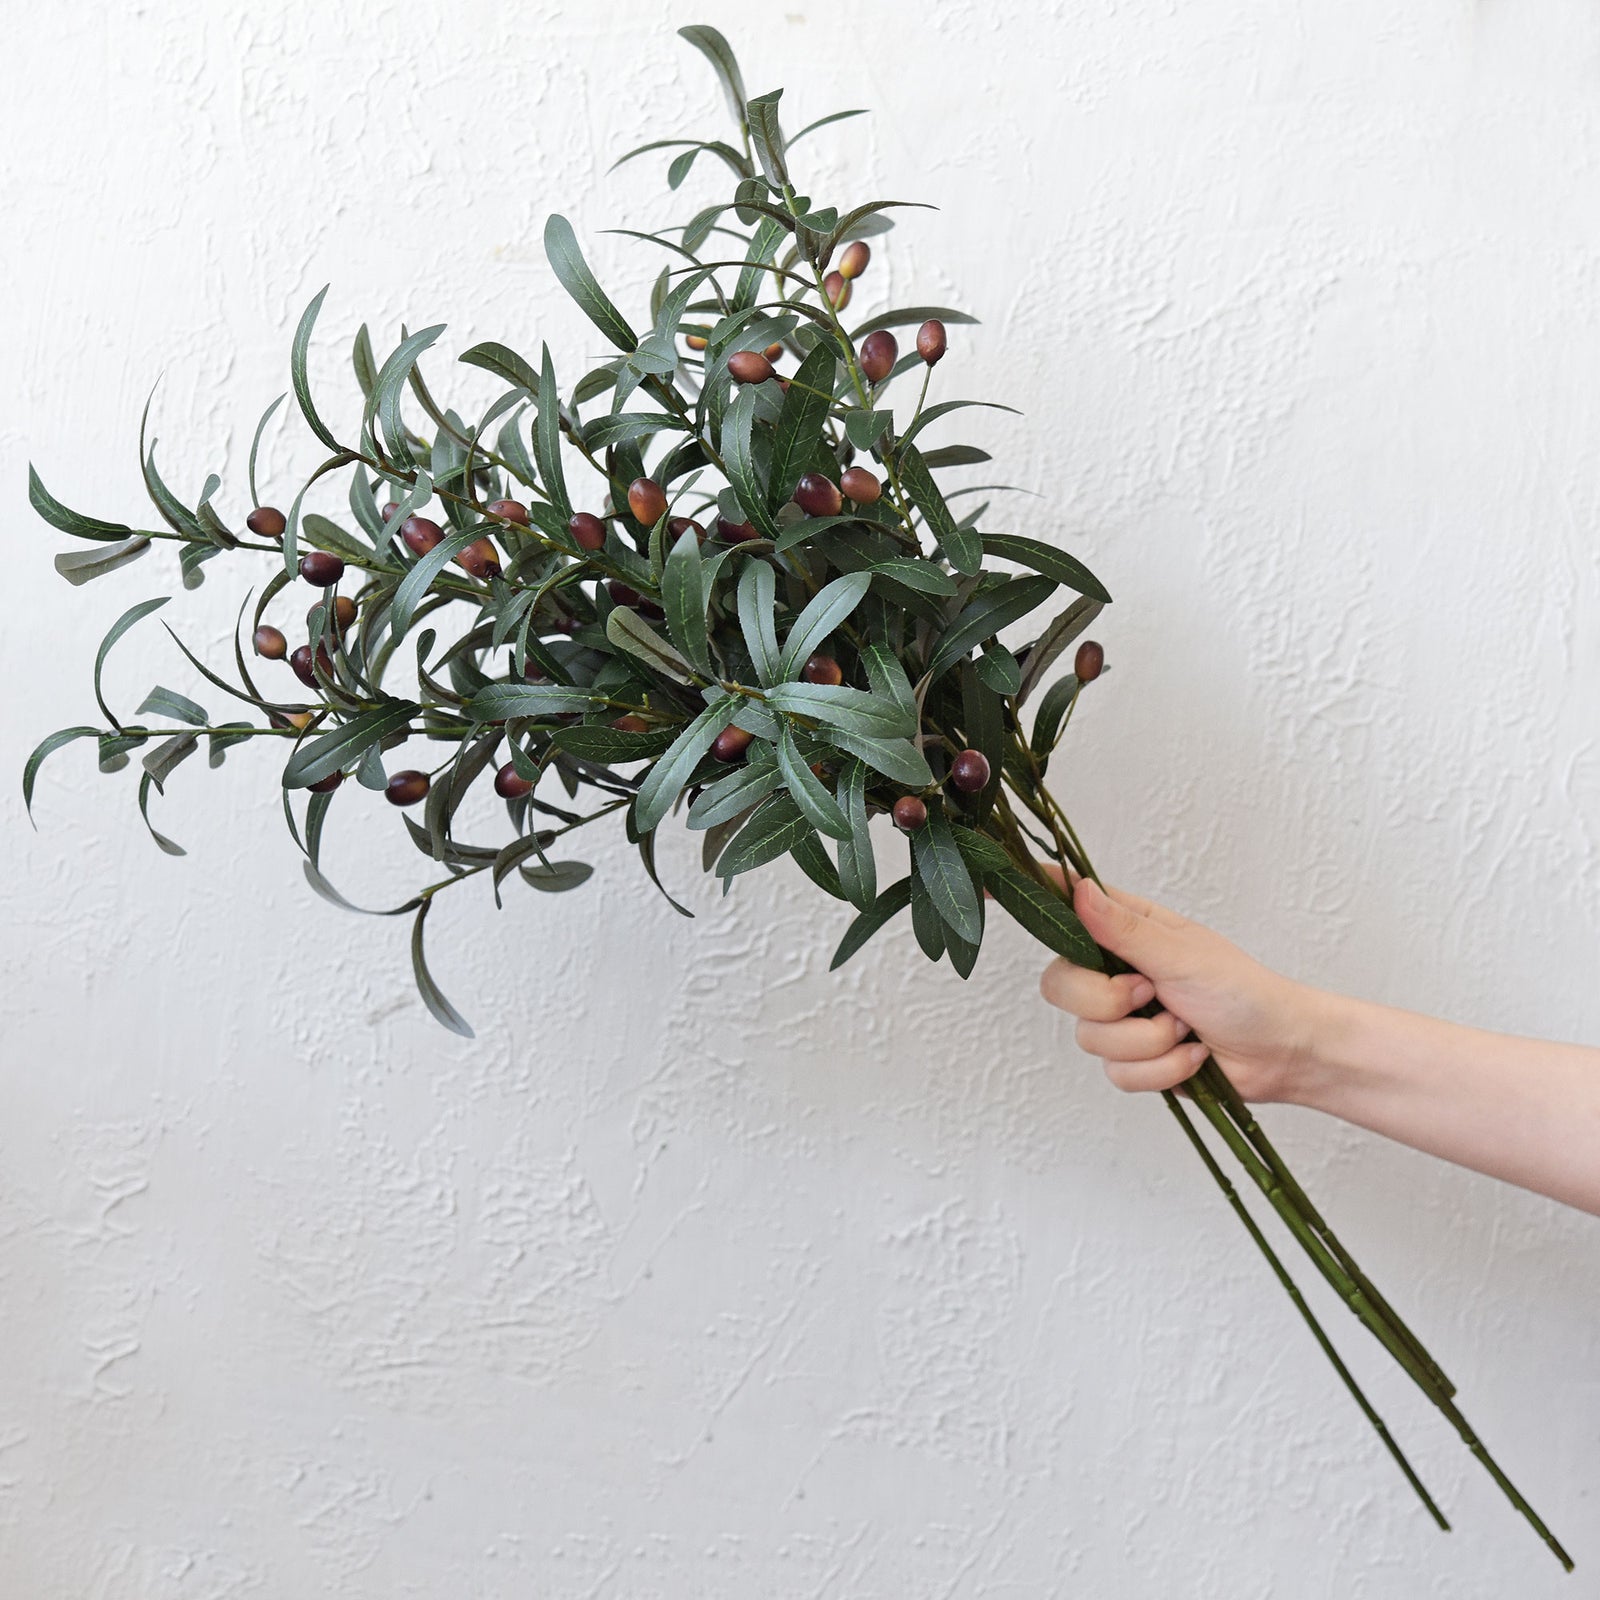 6 Stems Artificial Olive Leaves and Branches with Olives Greenery Floral Arrangement 31 inches (78cm)